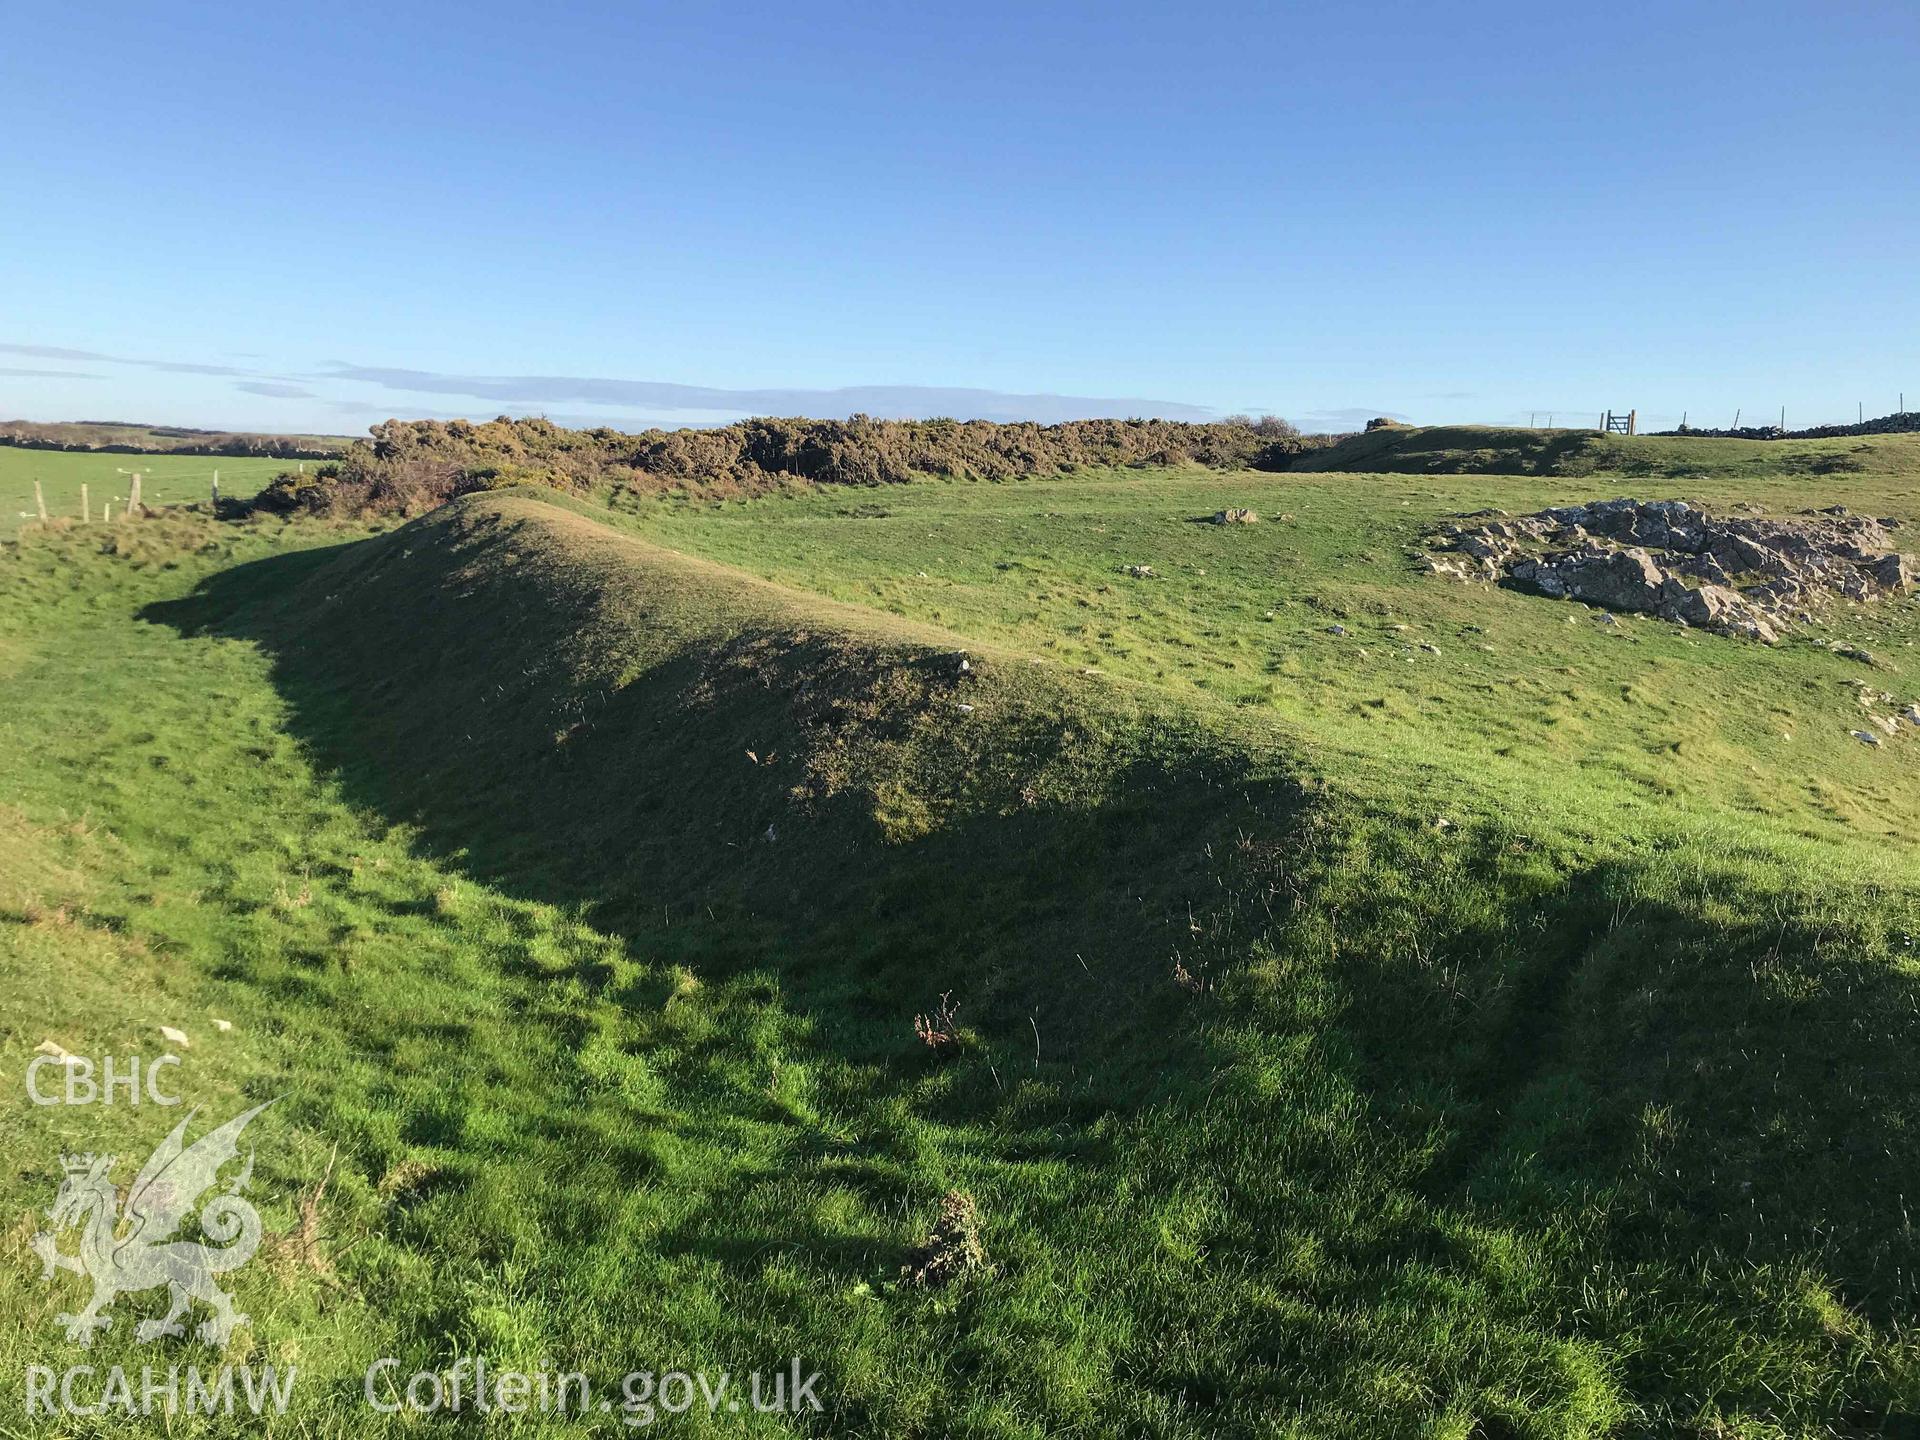 Digital photograph of outer rampart of the Knave promontory fort, produced by Paul Davis in 2020